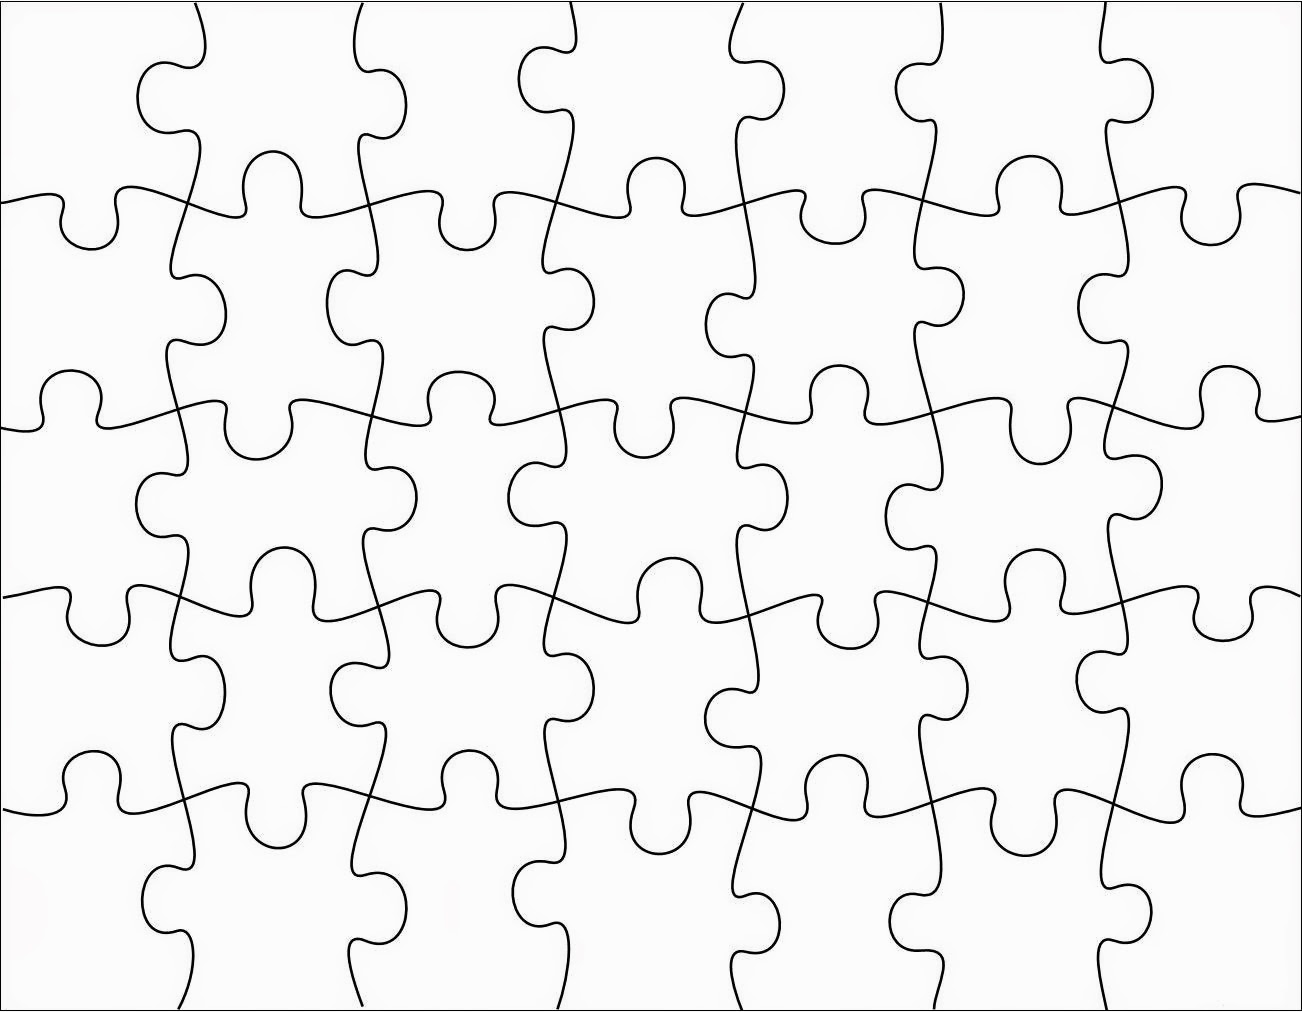 Puzzle Pictures Hd Wallpaper 6 - - 29 Piece Puzzle Template - HD Wallpaper 